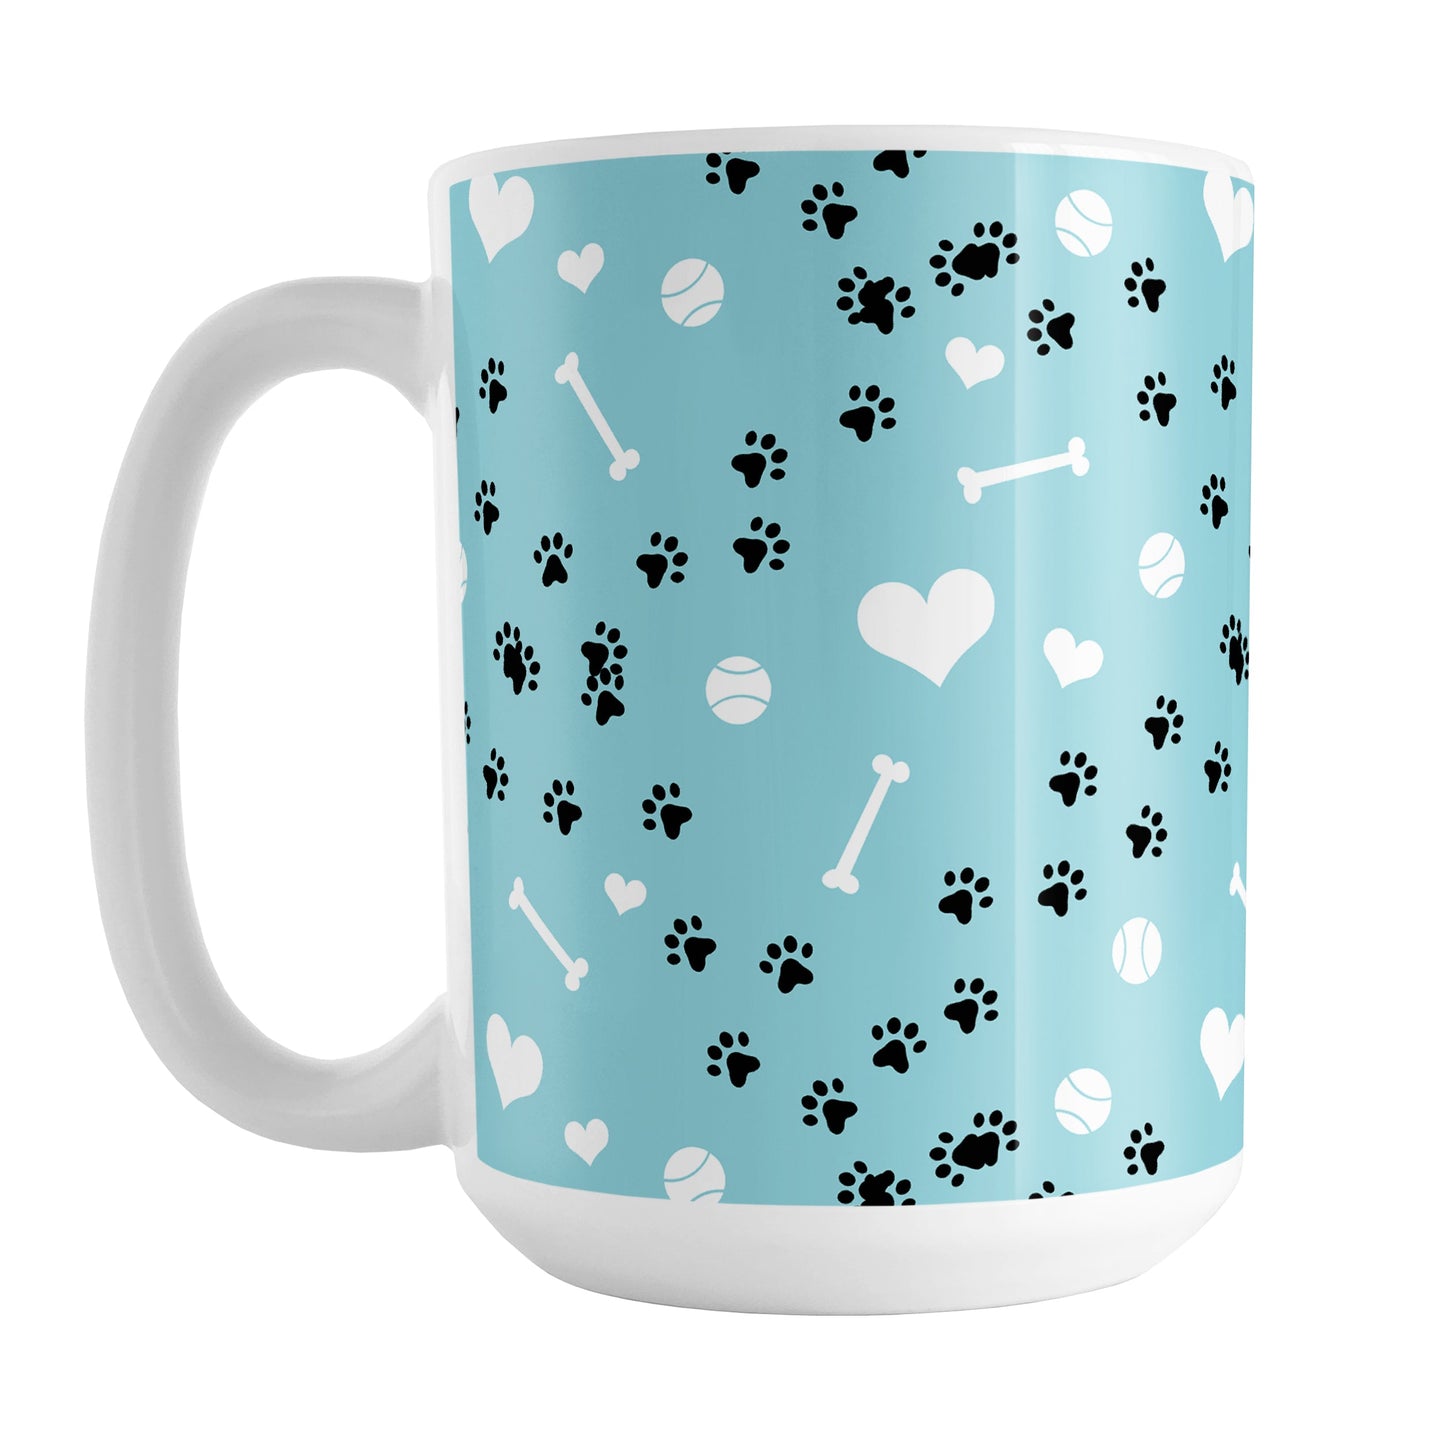 Puppy Run Blue Dog Mug (15oz) at Amy's Coffee Mugs. A ceramic coffee mug designed with a pattern of chaotic tracks of puppy paw prints running around the mug with white dog bones, balls, and hearts over a light blue background. This mug is perfect for people who love the chaotic play of puppies, love dogs, and like blue mugs. 